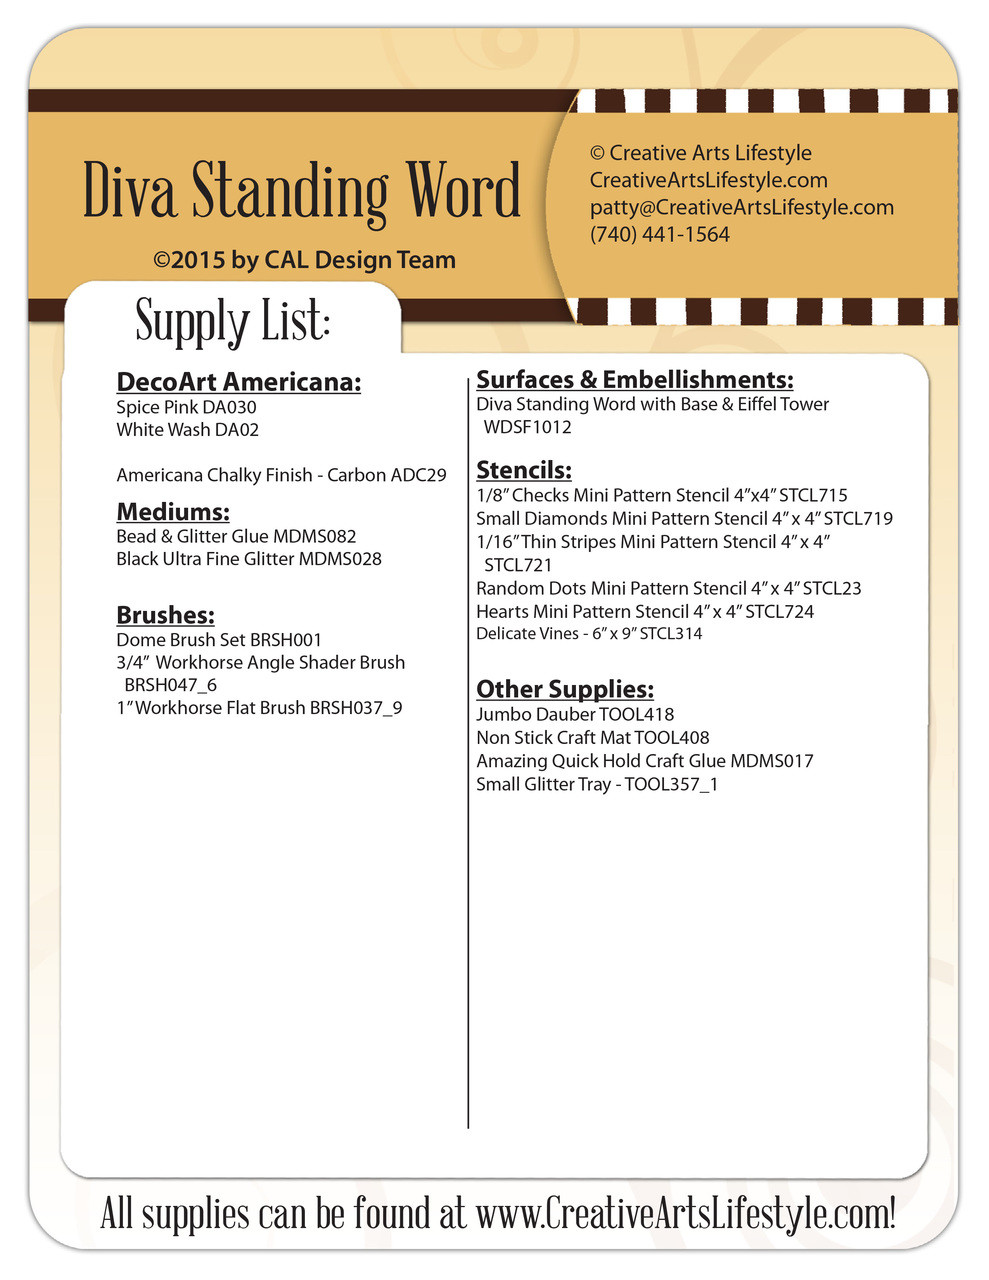 Diva Standing Word Pattern Packet - Patricia Rawlinson